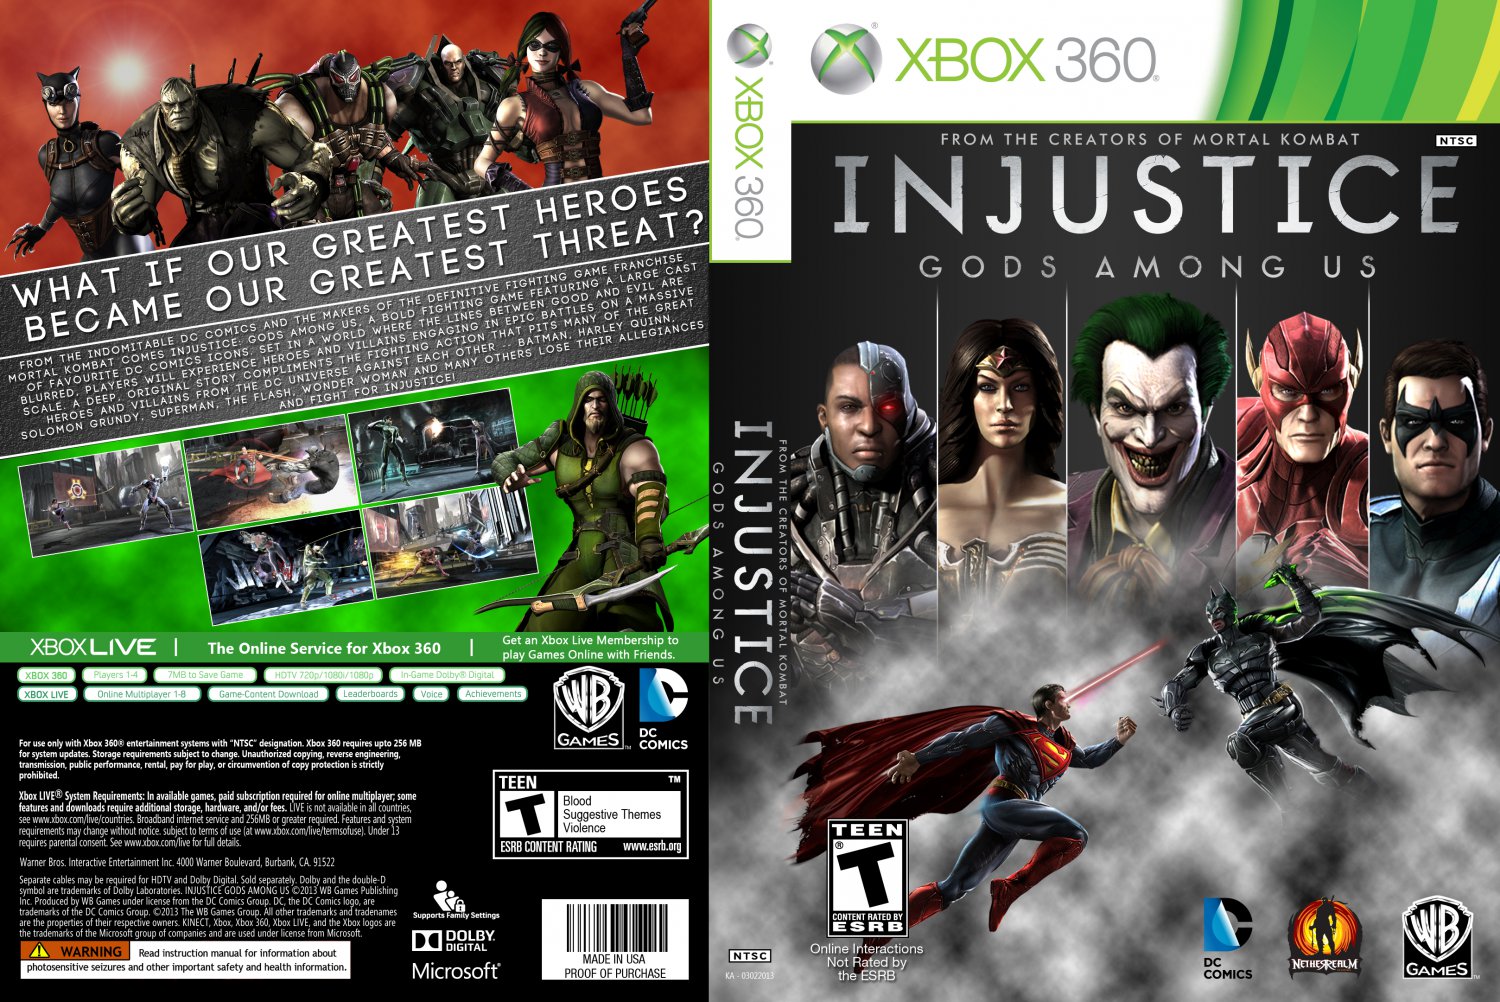 Xbox 360 год игры. Injustice Xbox 360 обложка. Injustice Xbox 360 диск. Injustice Gods among us Xbox 360. Injustice Ultimate Edition Xbox 360.